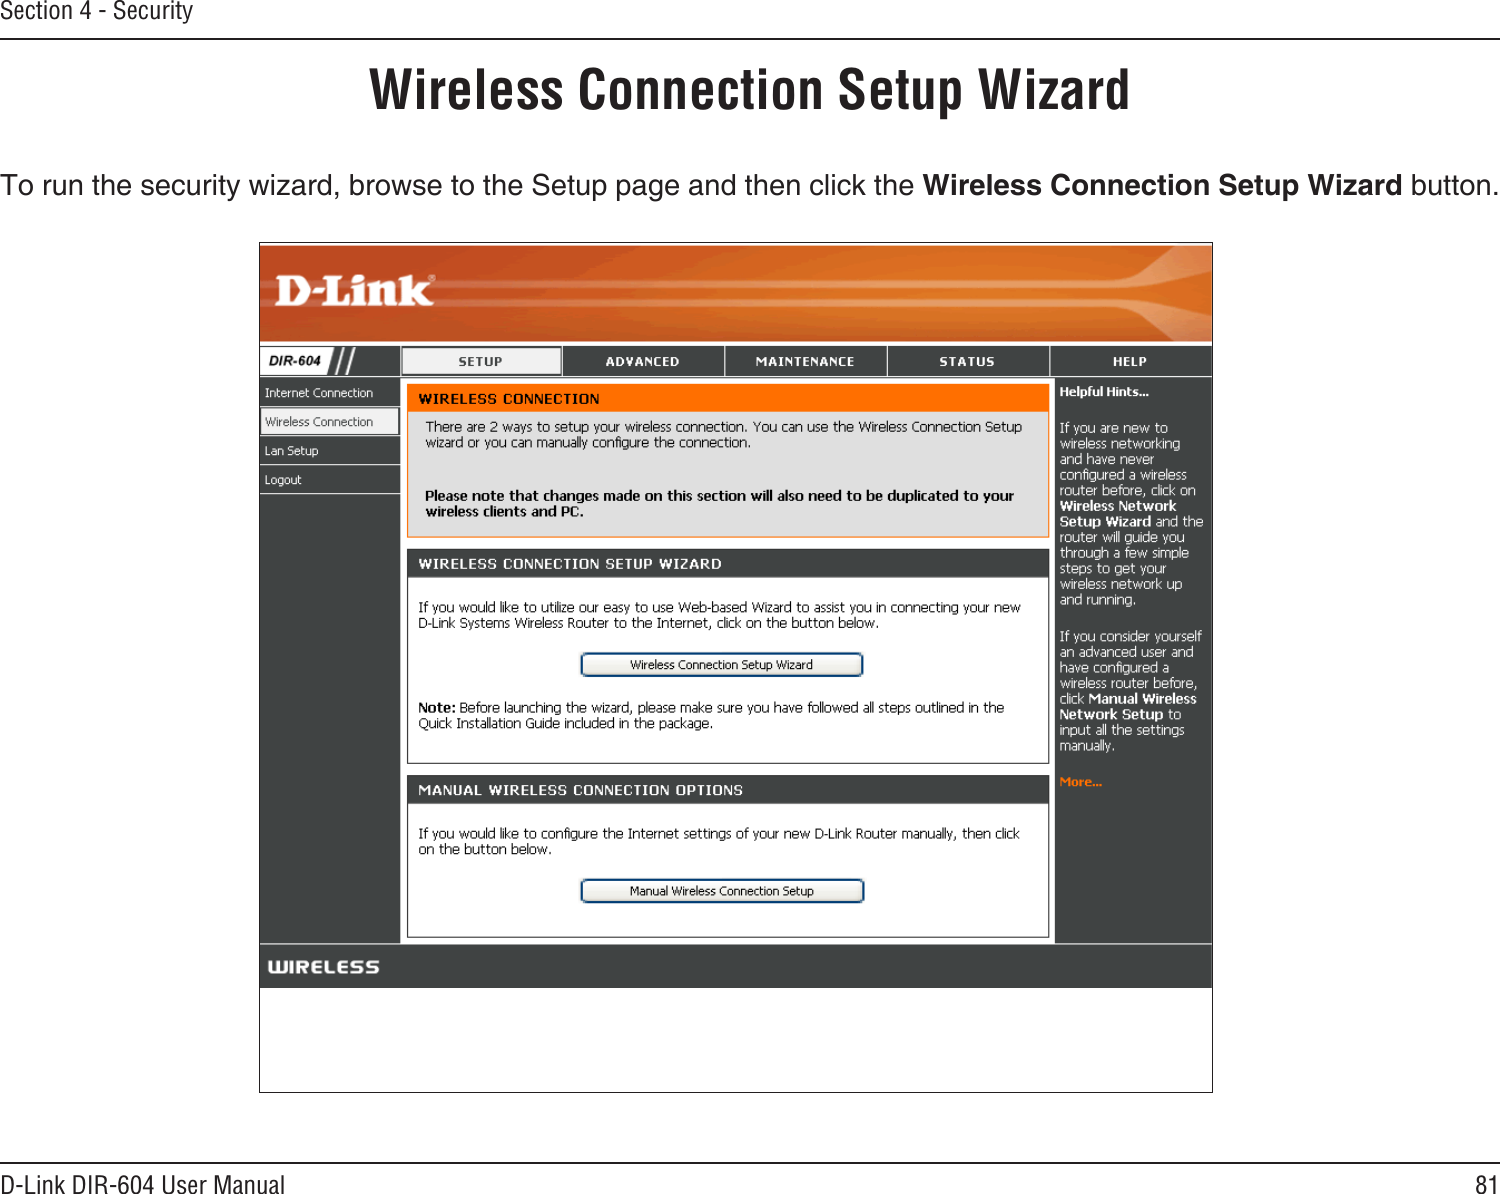 81D-Link DIR-604 User ManualSection 4 - SecurityWireless Connection Setup WizardTo run the security wizard, browse to the Setup page and then click the Wireless Connection Setup Wizard button. 